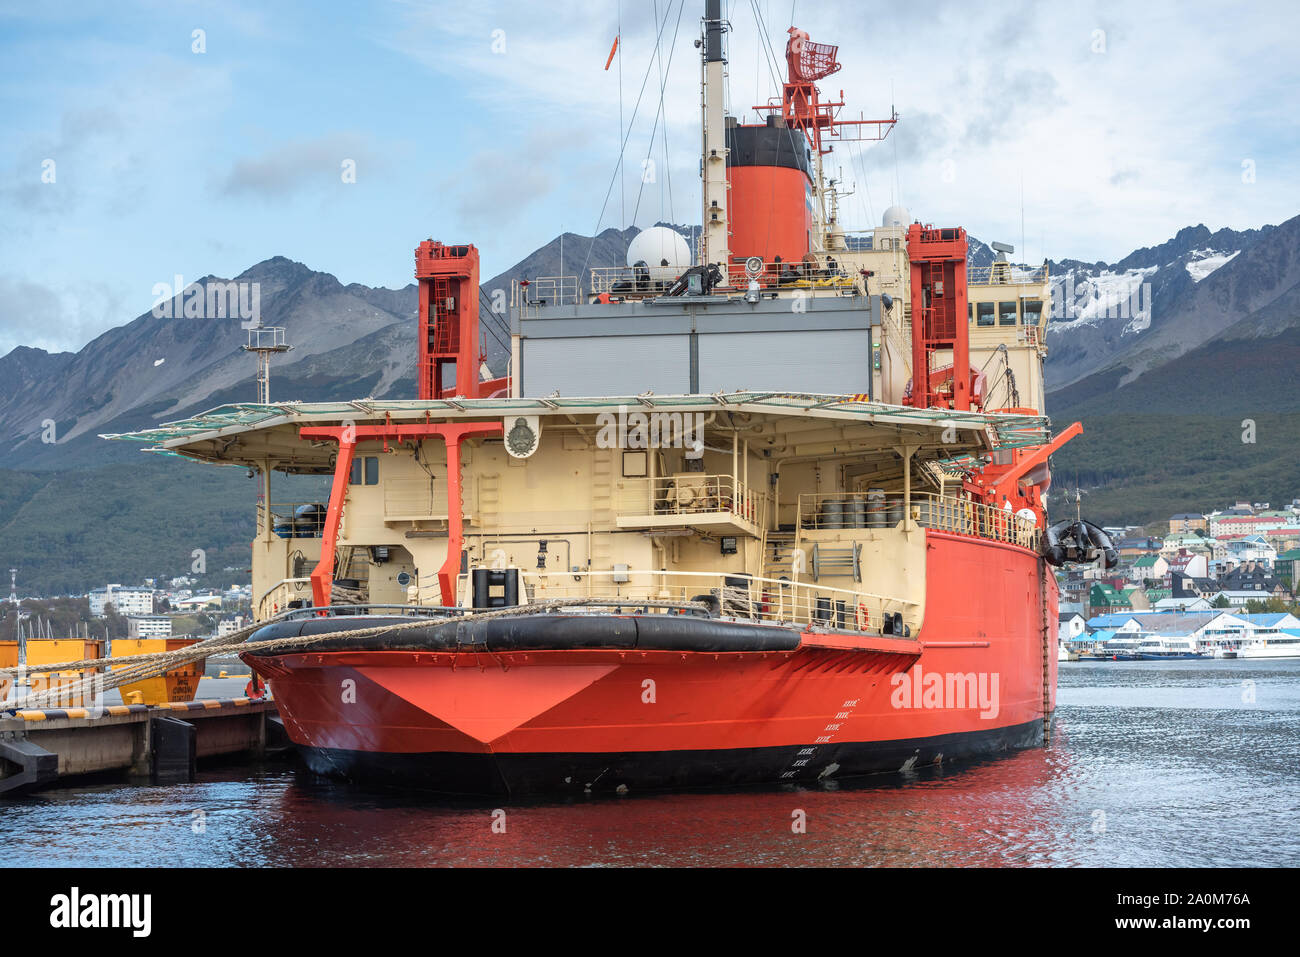 Ushuaia, Argentina - March 27 2019: Stern of a large icebreaker of the Argentine Navy moored in the seaport of the city Stock Photo